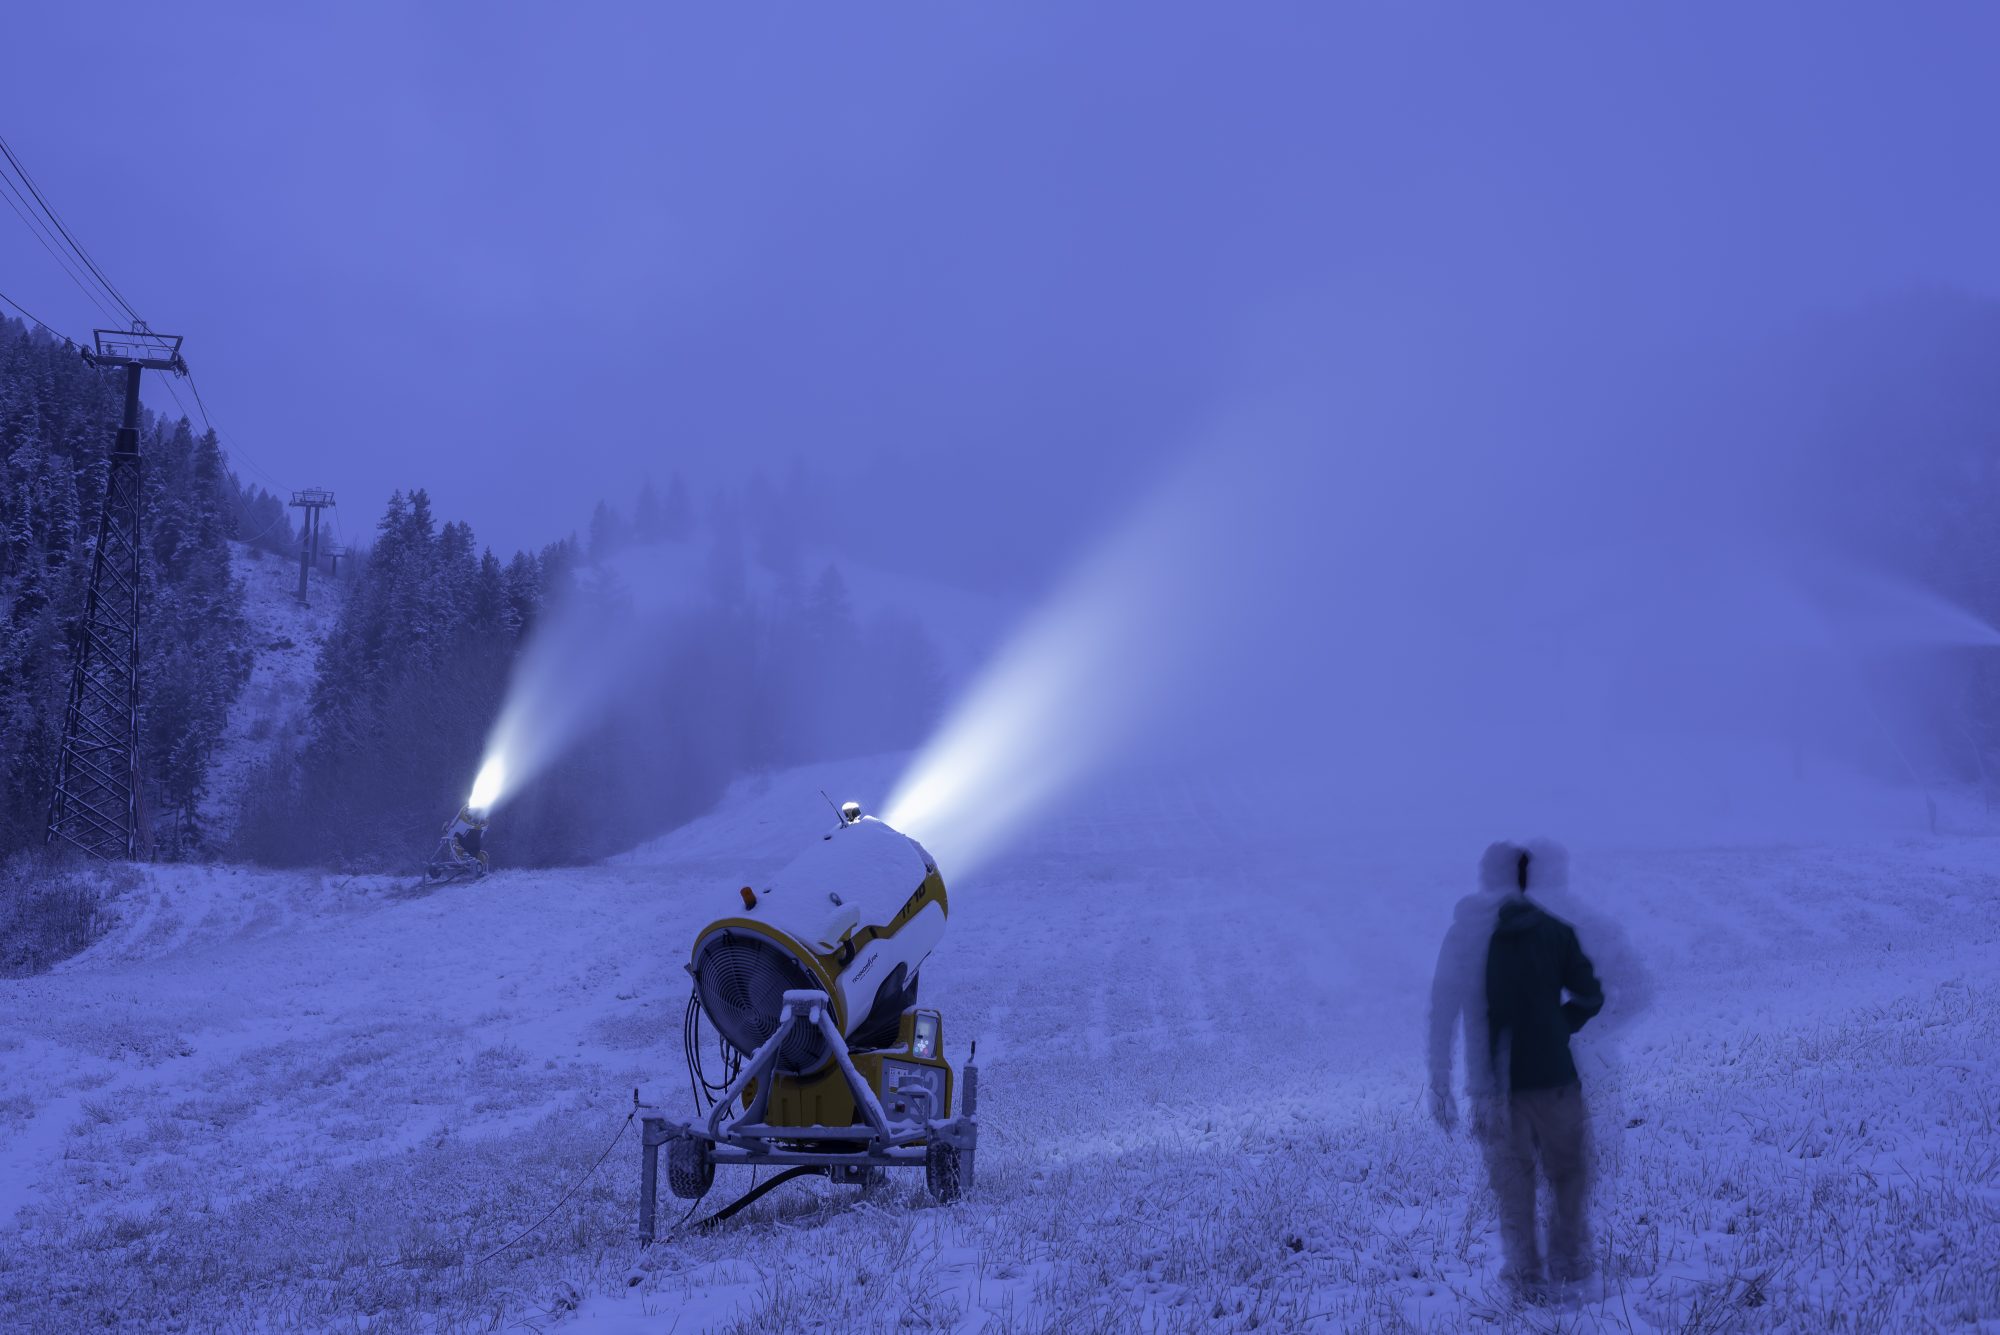 Snowmaking in Ajax. Photo: Dan Bayer. Aspen Skiing Company. Snowmaking Operations Underway at Aspen Snowmass for the 2018-19 Season